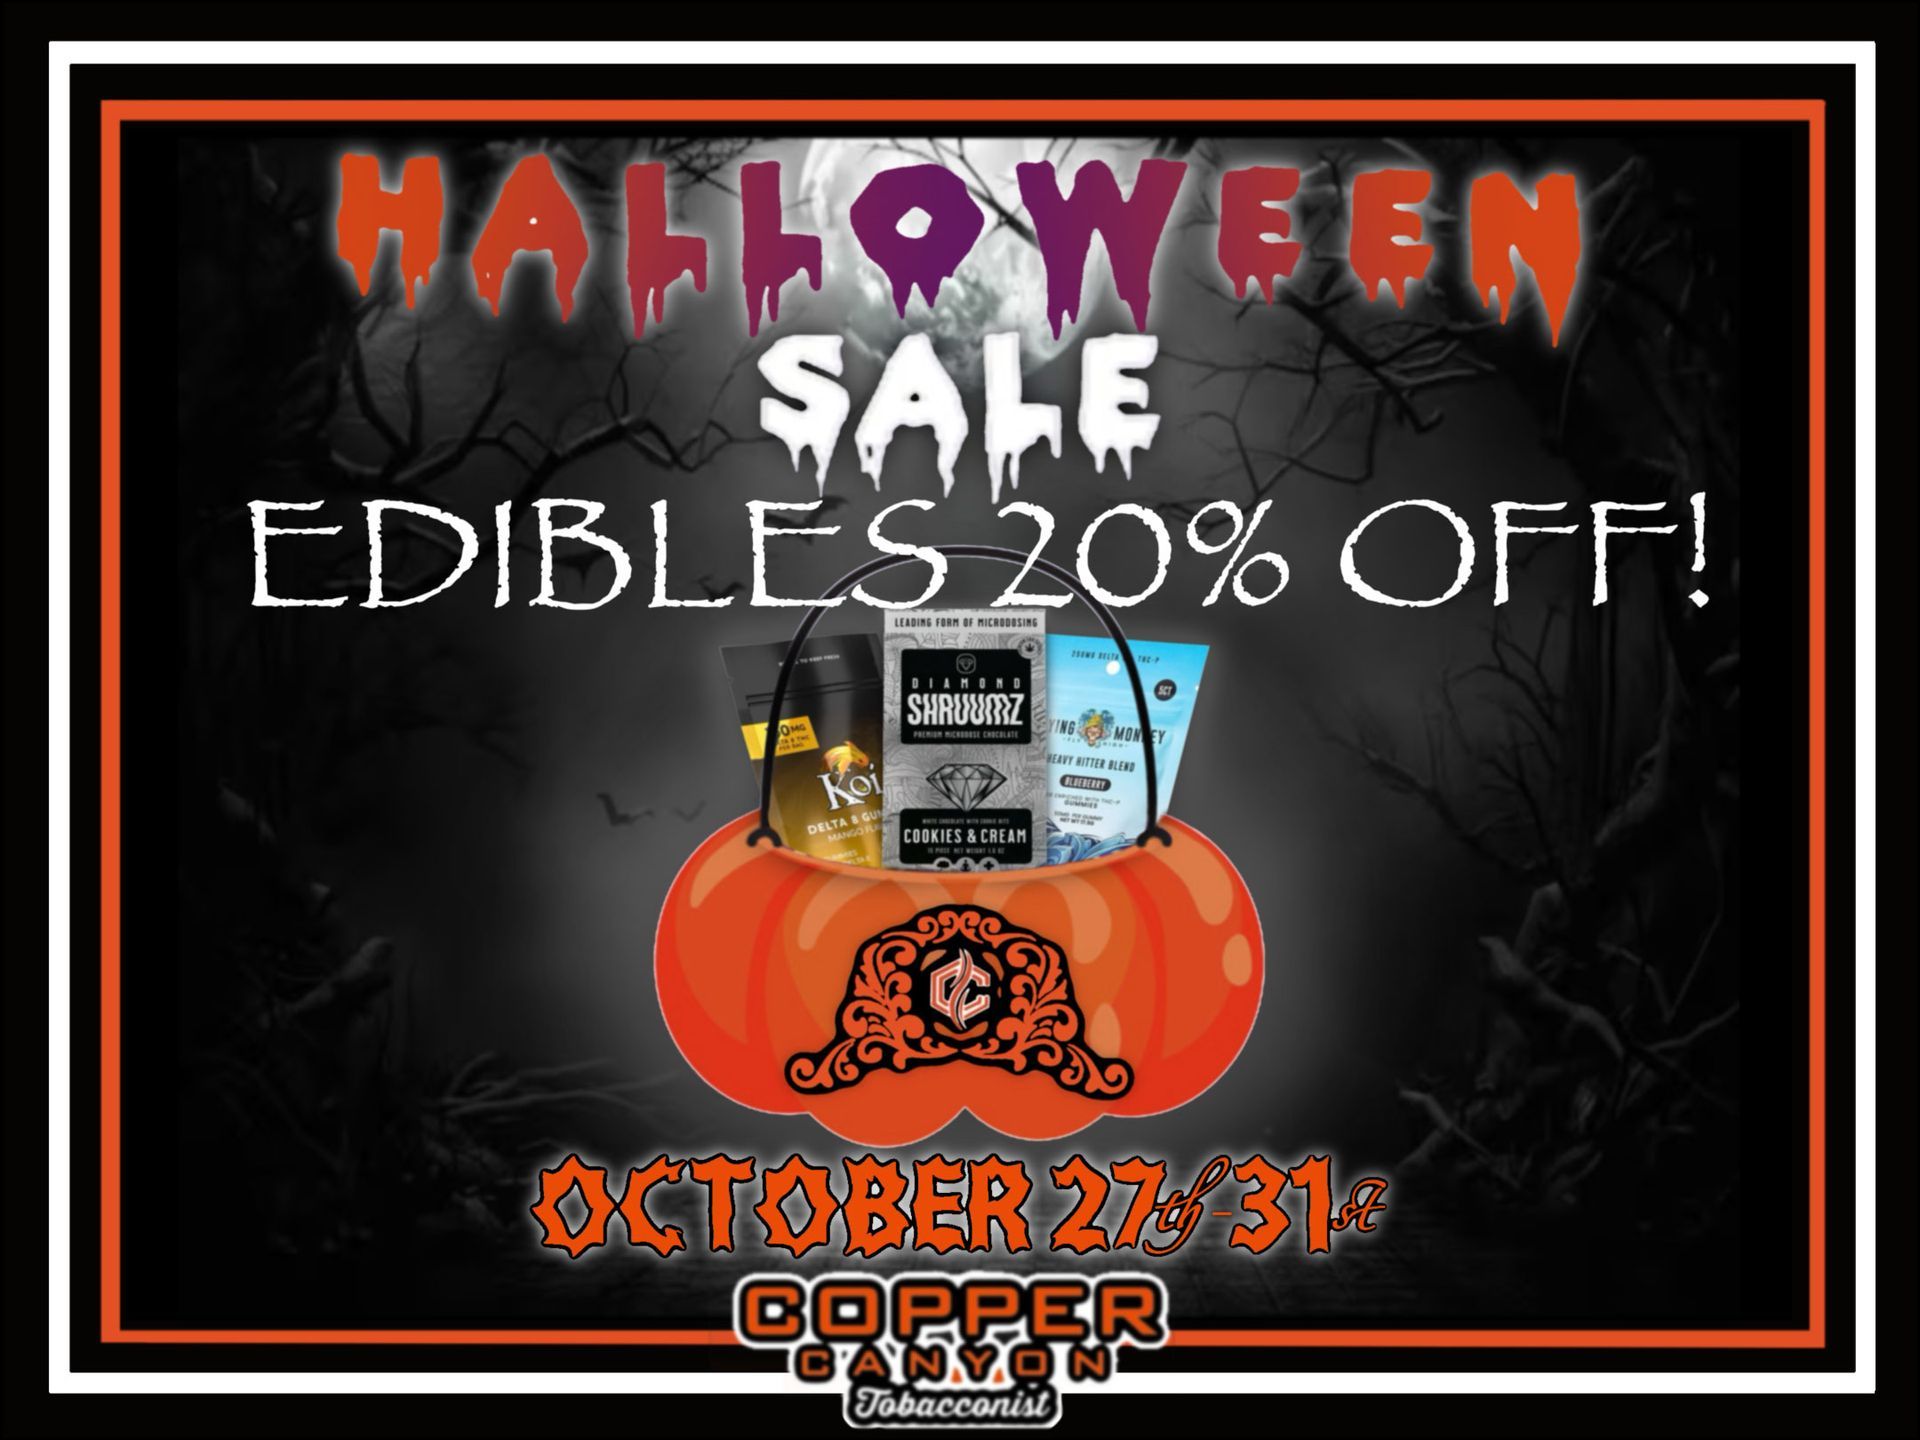 Copper Canyon Halloween Sale